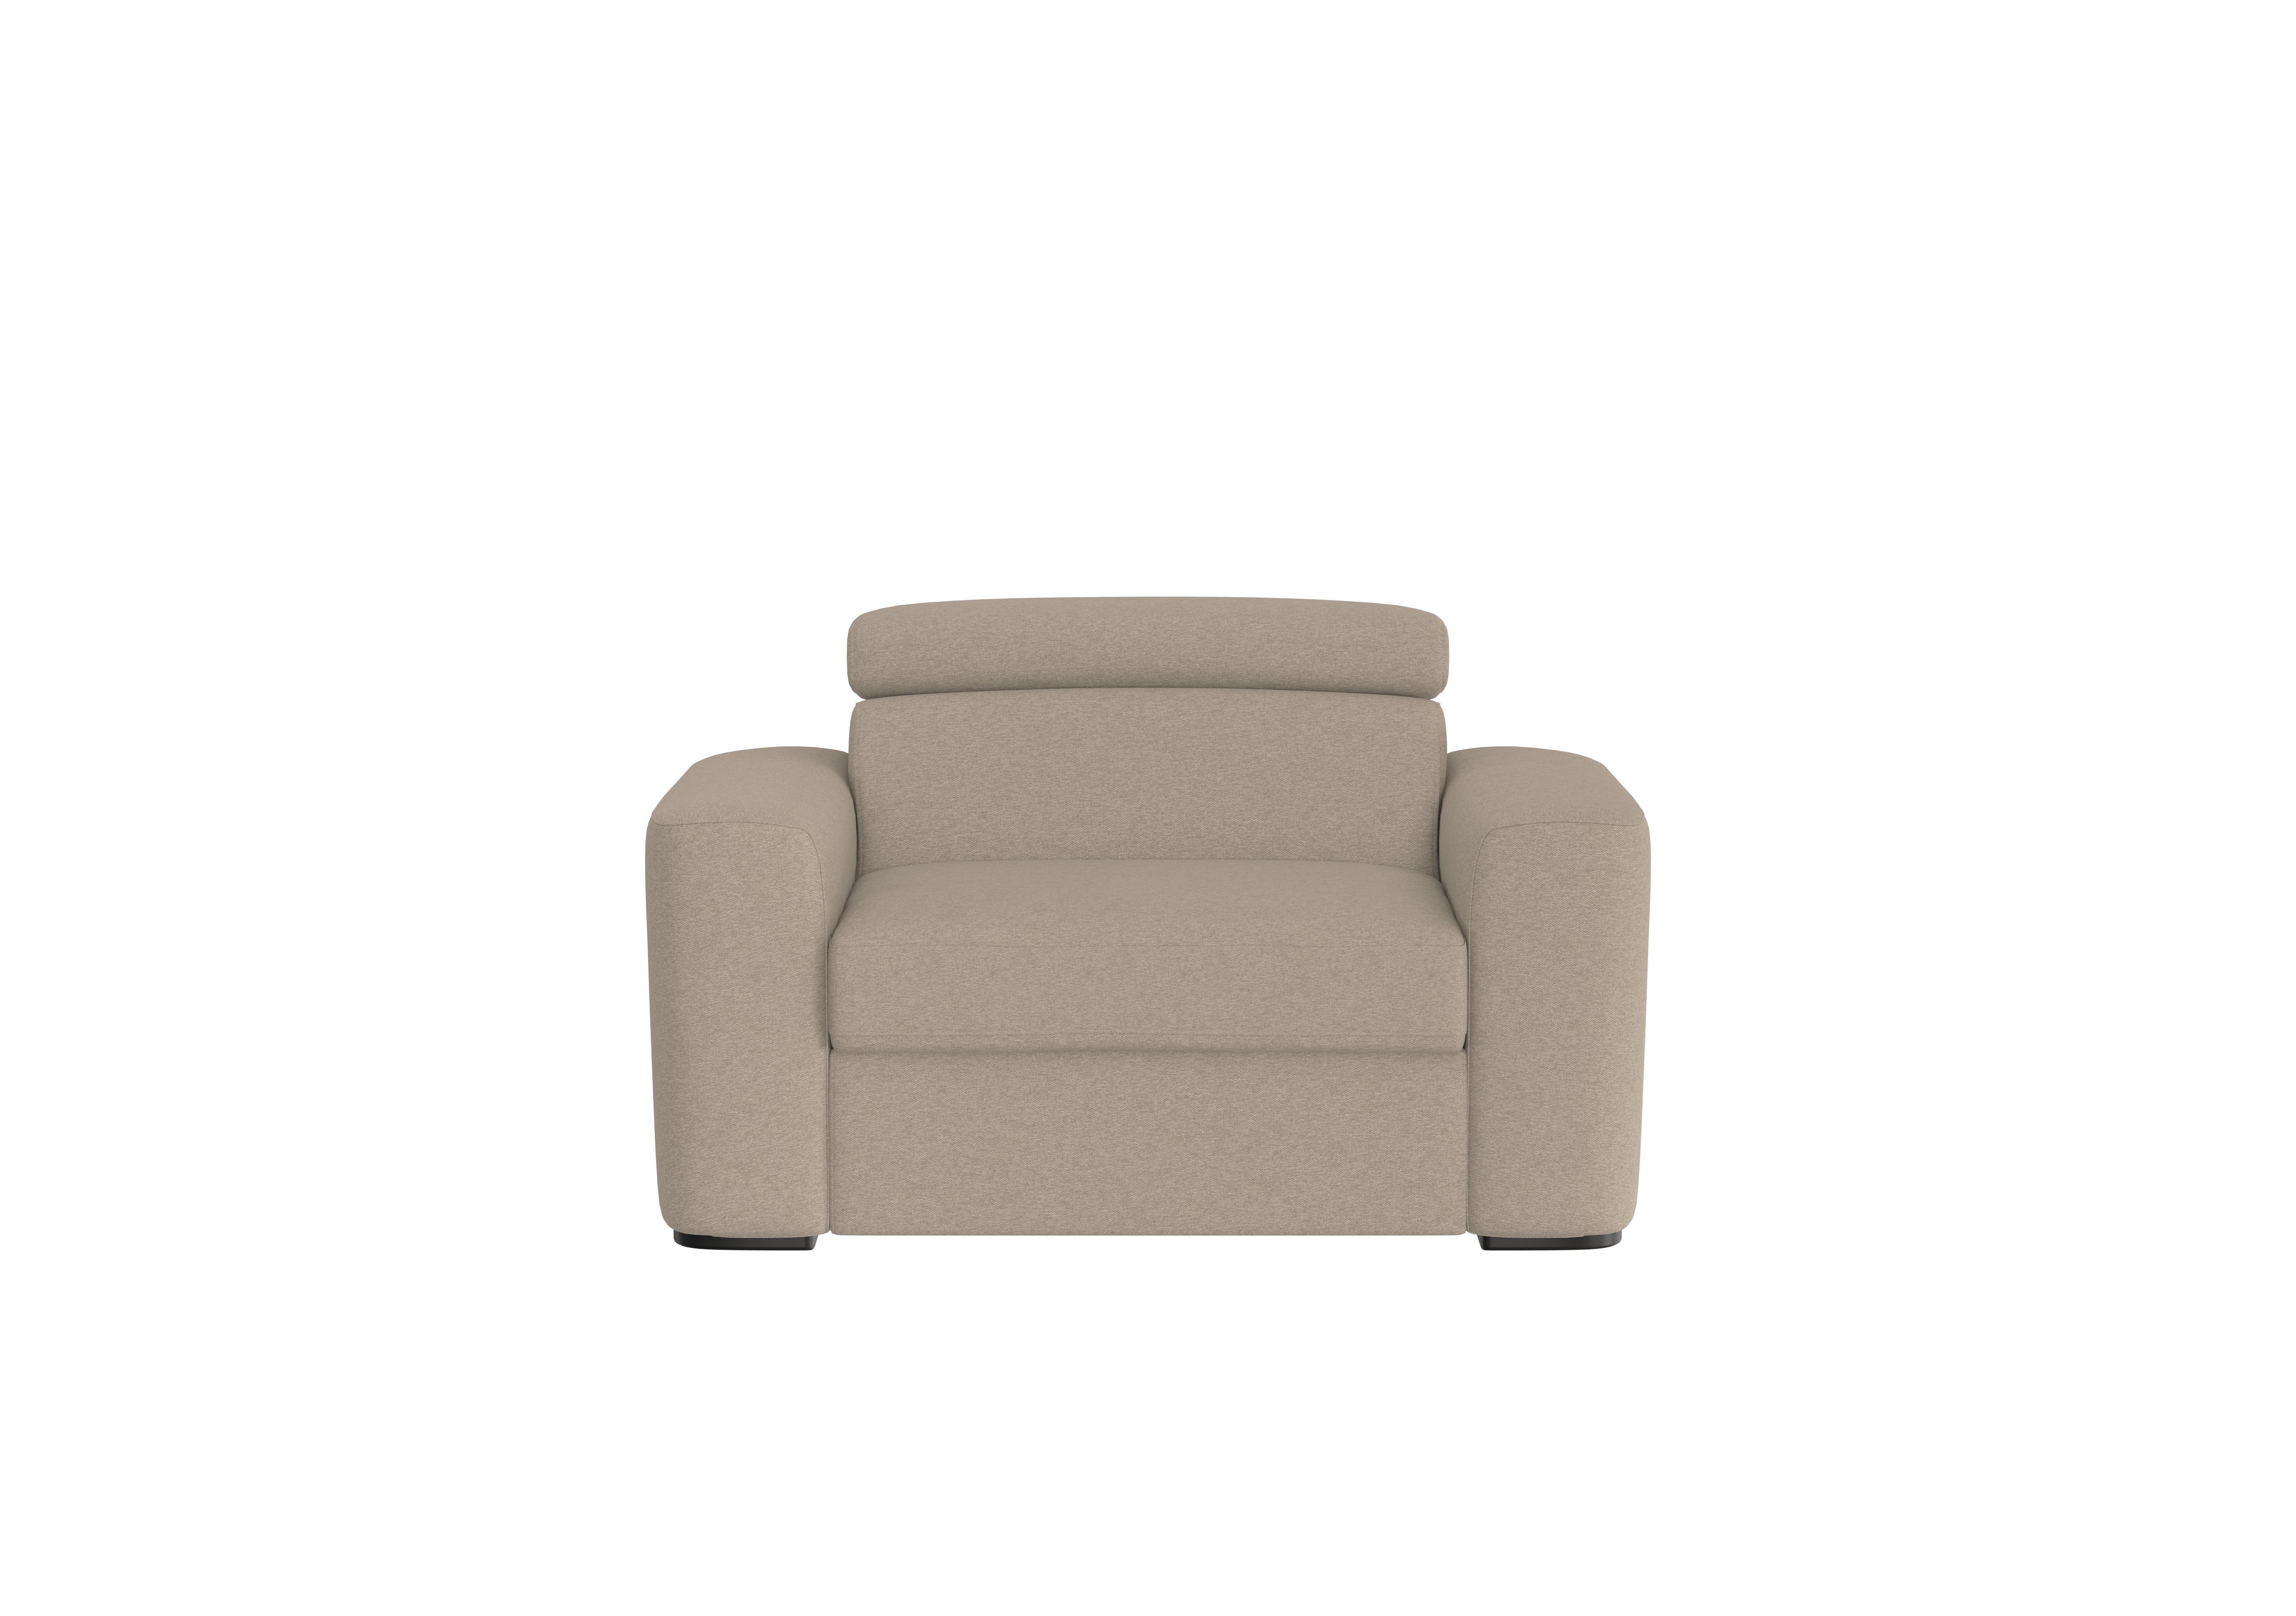 Infinity Fabric Chair Sofa Bed in Fab-Ska-R28 Beige on Furniture Village